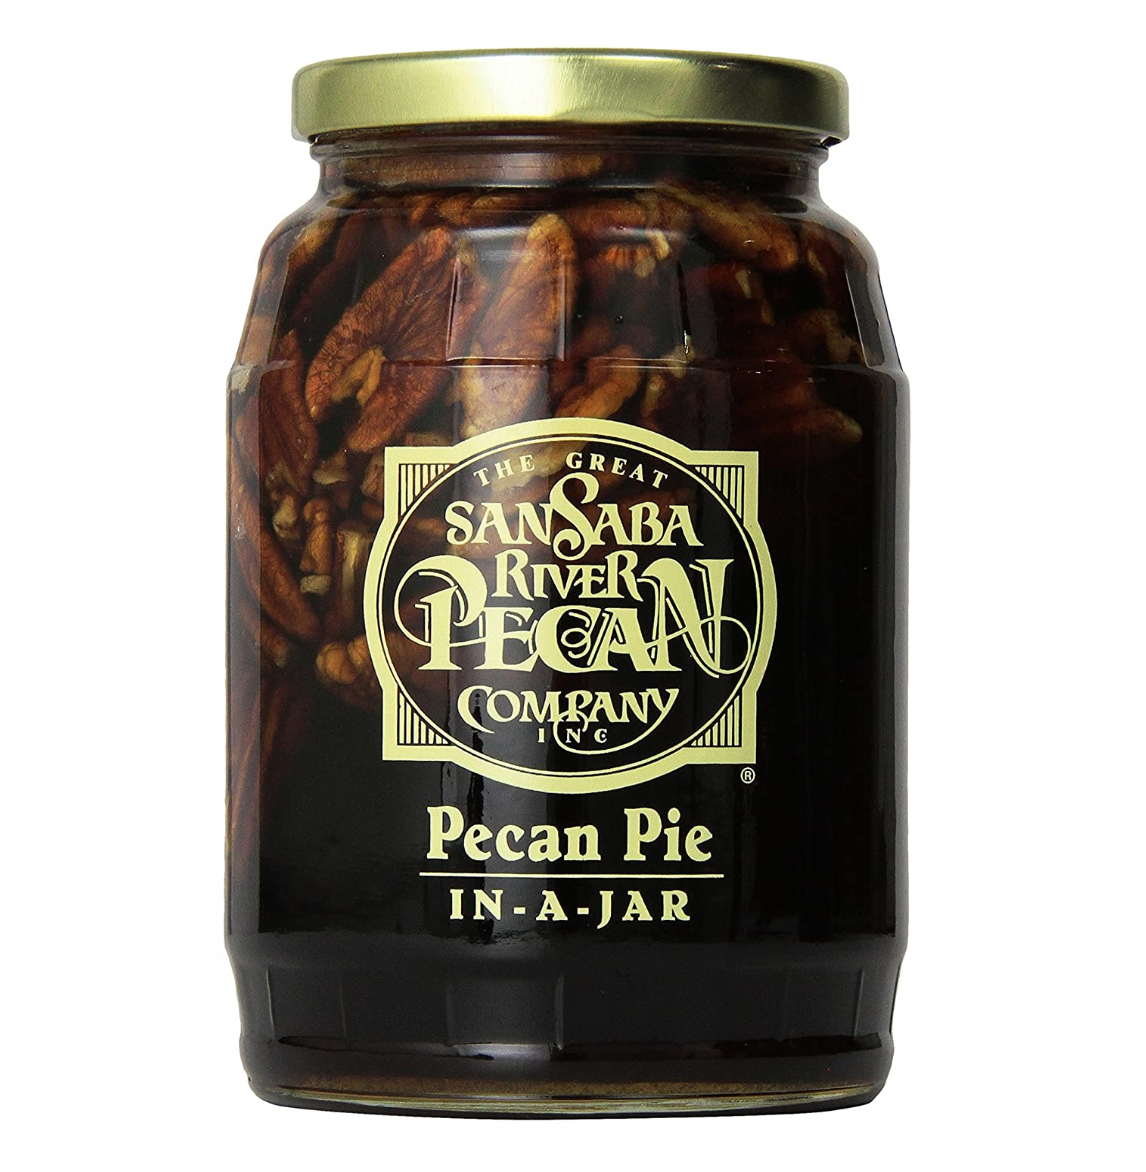 Traditional Pecan Pie-In-A-Jar